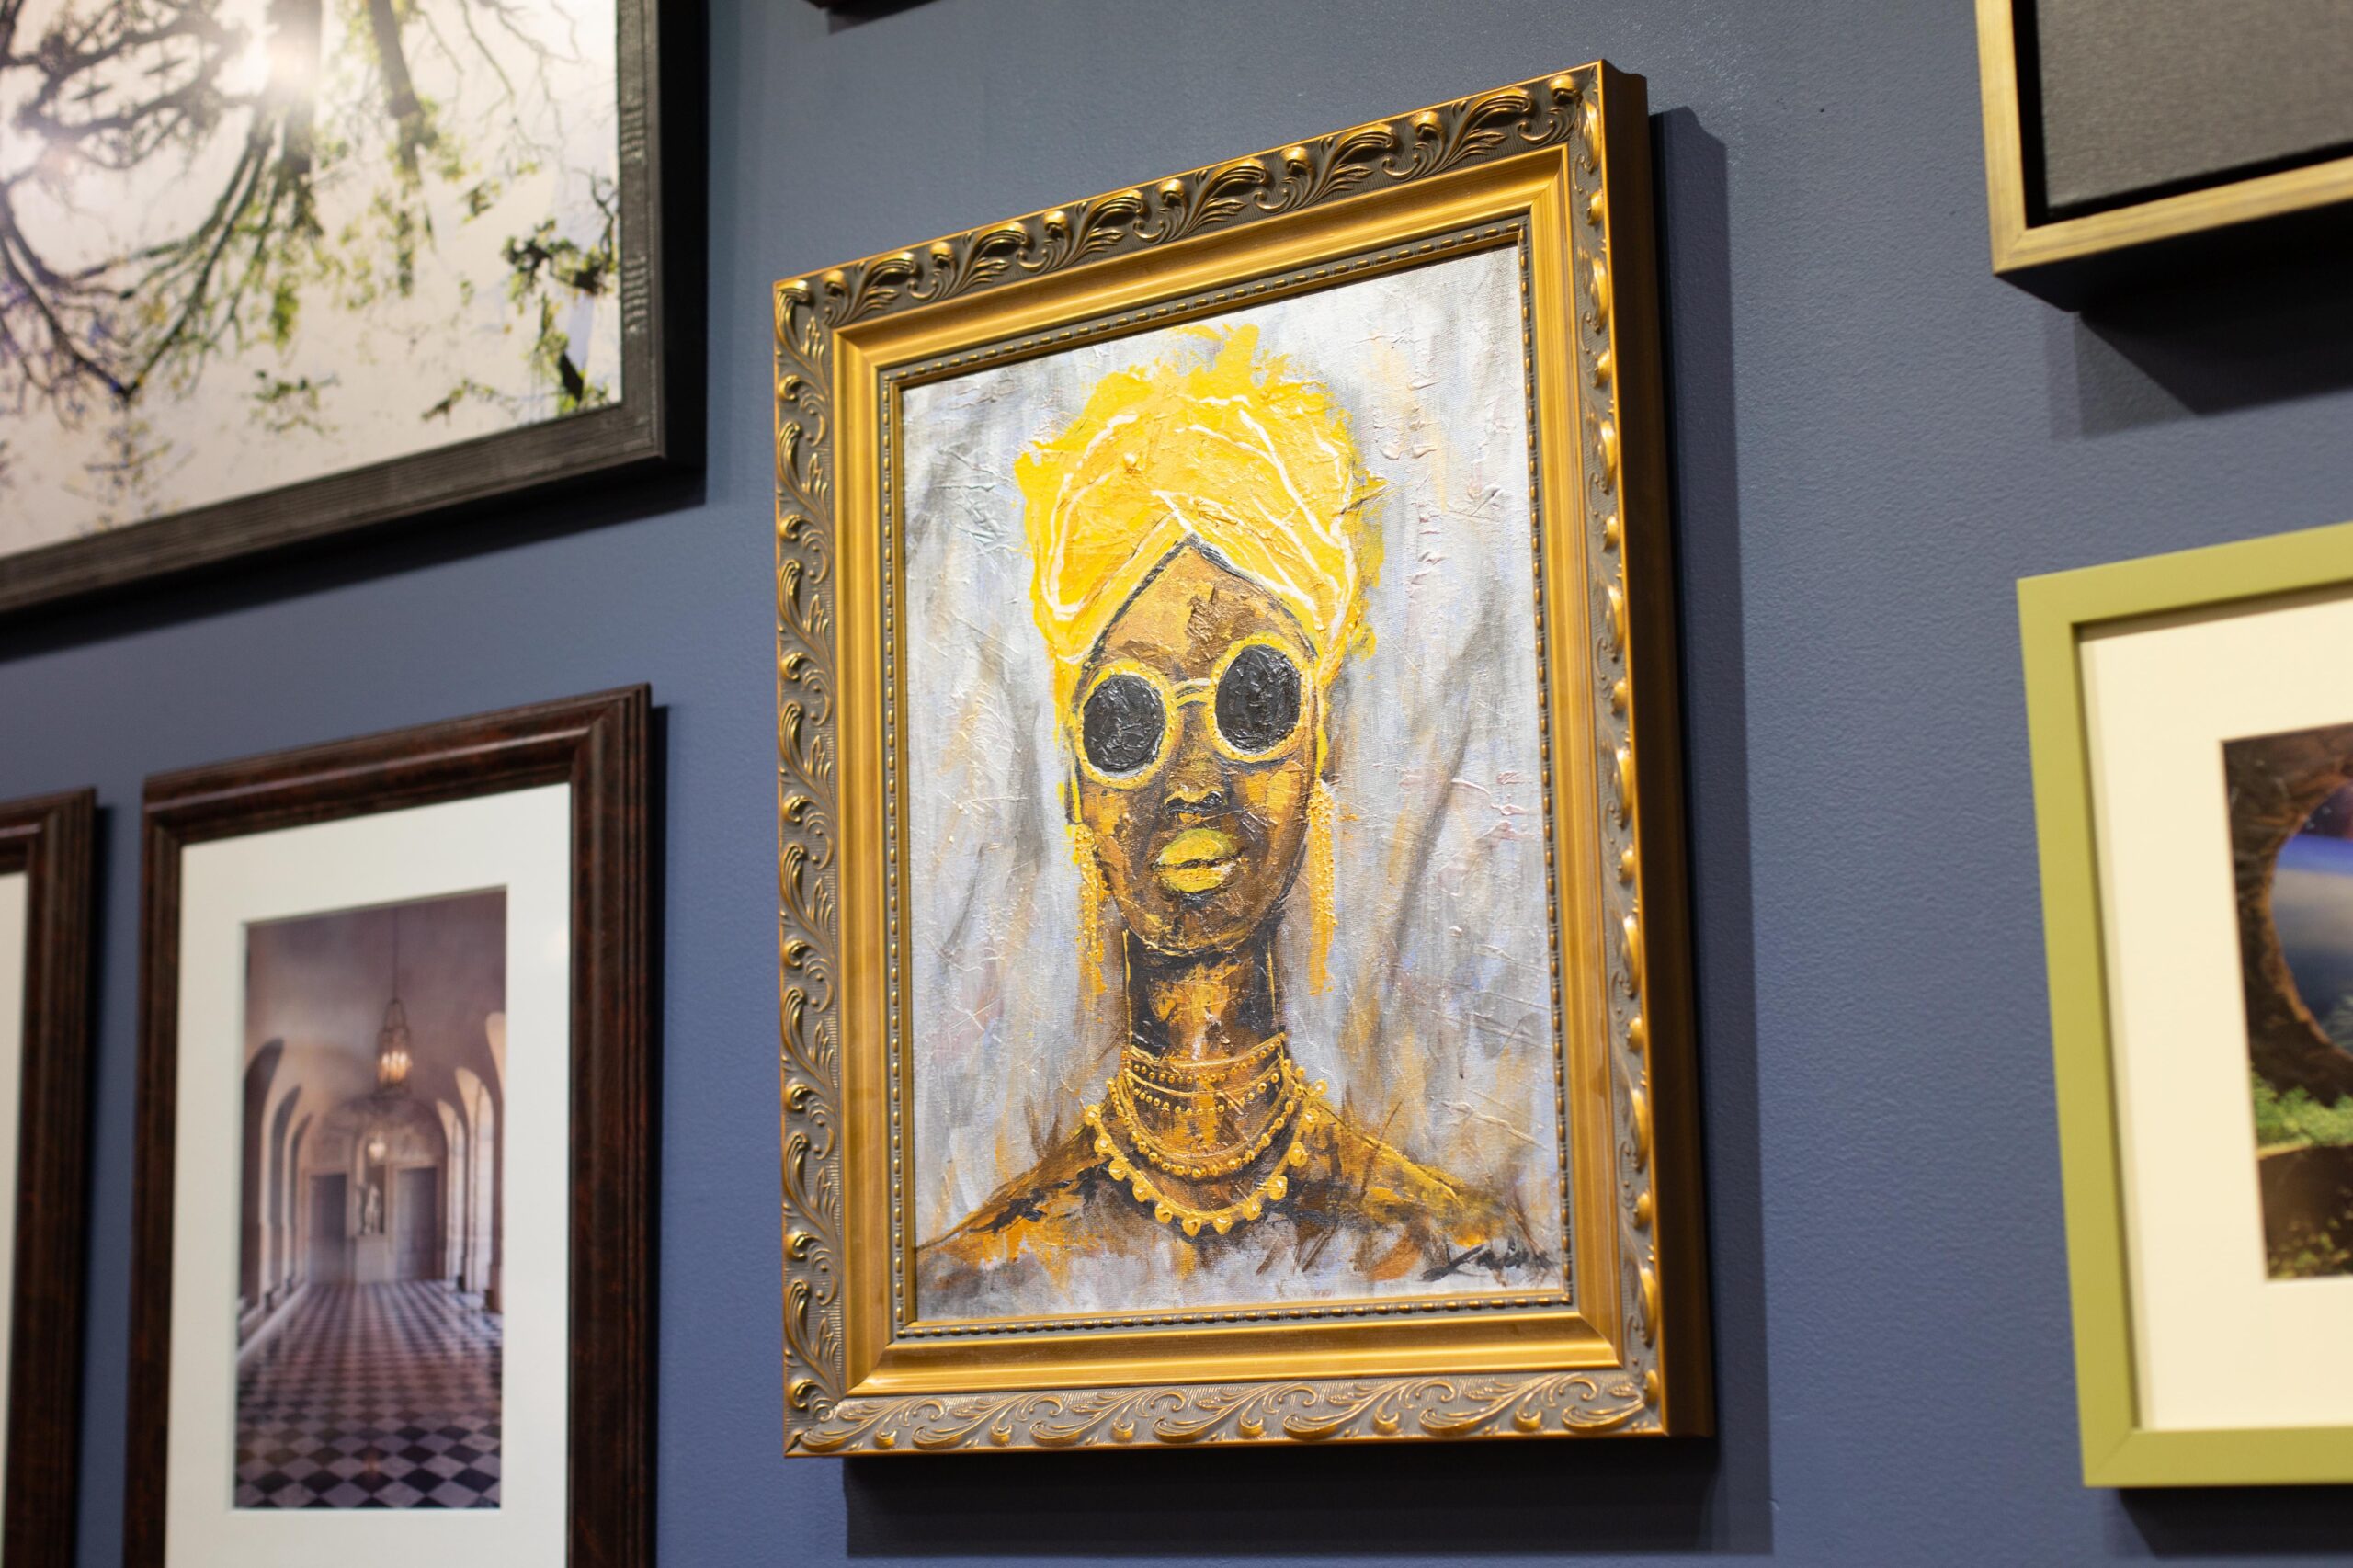 A closeup angle shows three pieces of art, focusing on the painting of a woman in an elegant gold frame. The art hangs in the Peterson Picture Co. gallery.